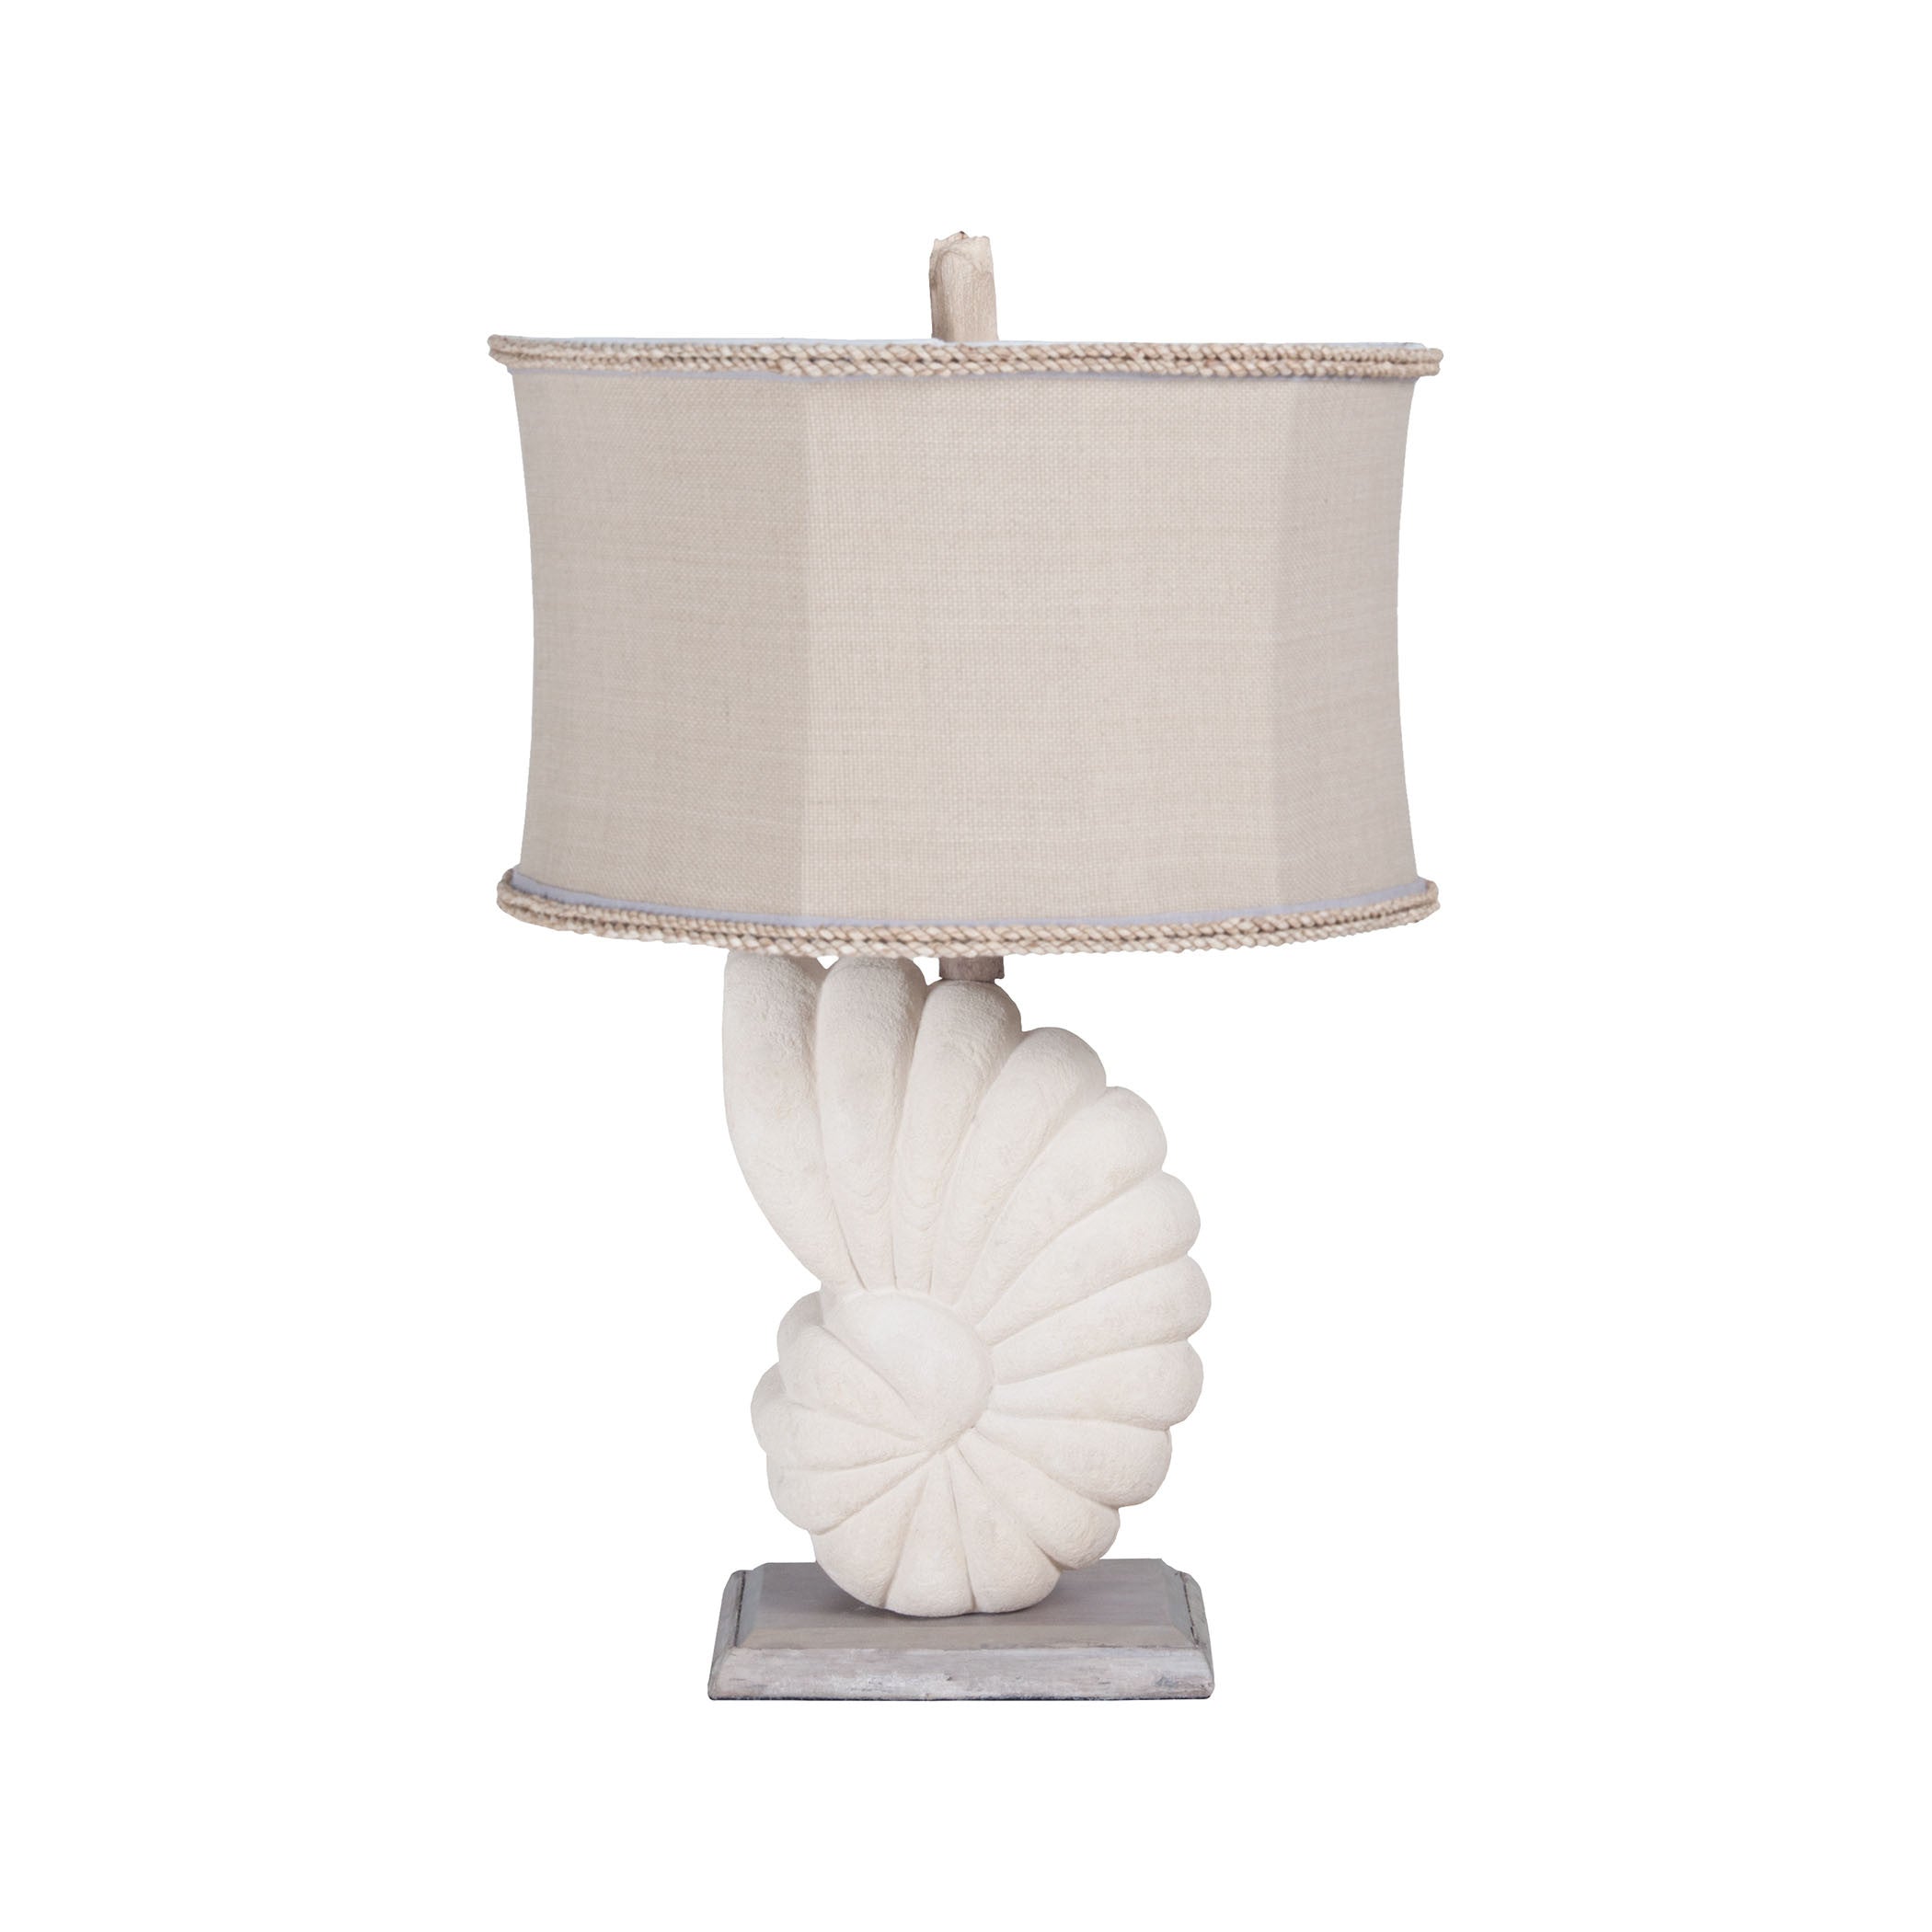 Guildmaster Gui-3516011 Stone Nautilus Collection Aged Silver,oyster Finish Table Lamp